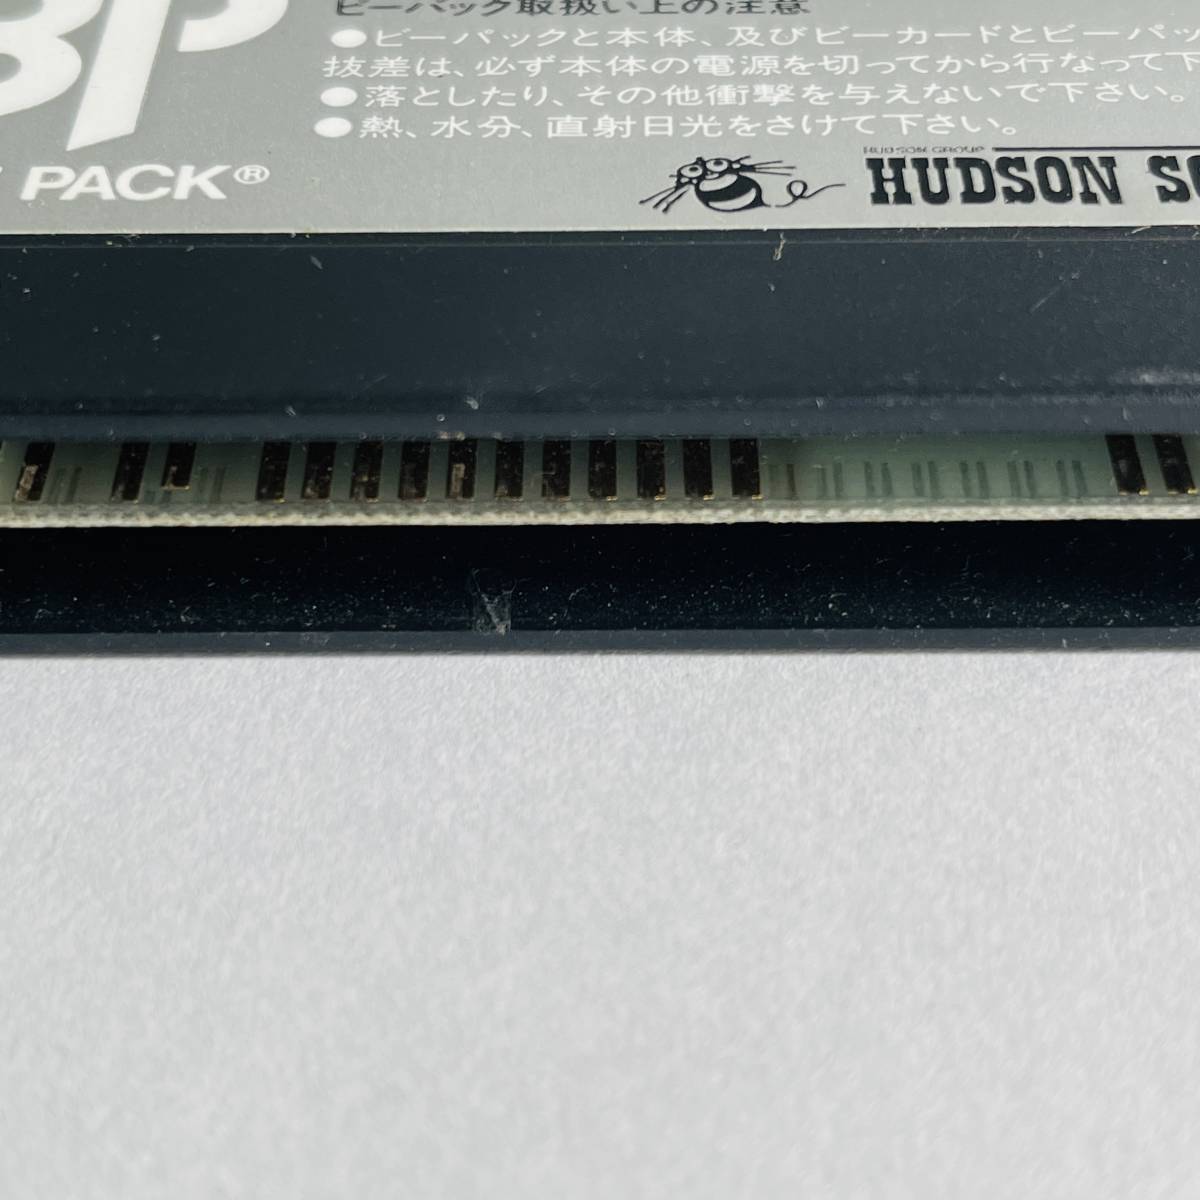 MSX BEE PACK A11 ビーカード用カートリッジ BEE CARD ハドソン ソフトの画像8